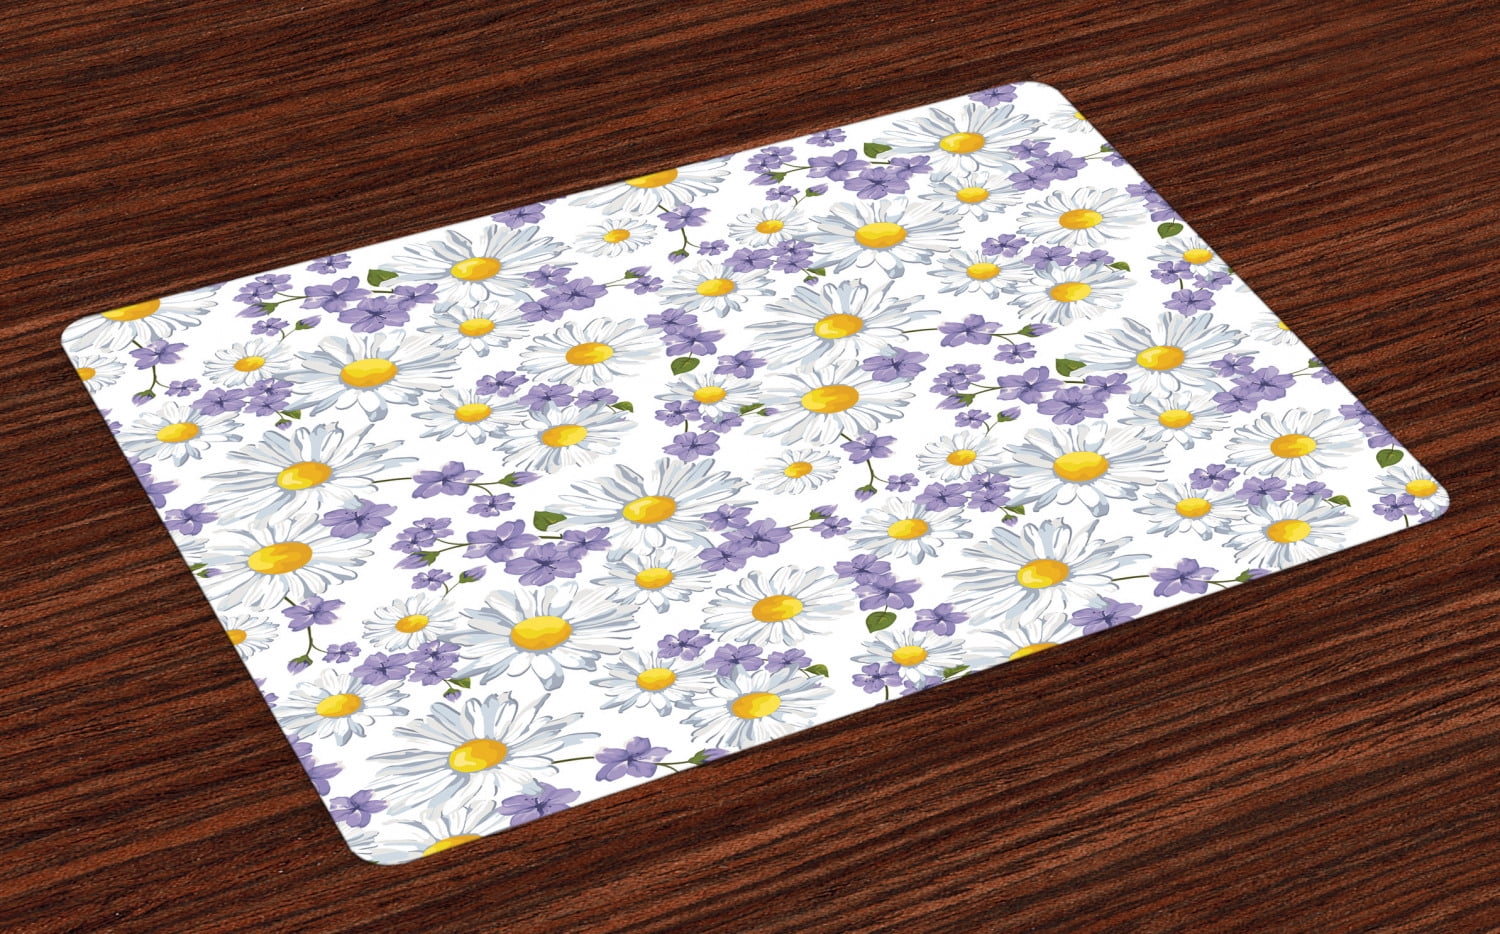 Lilac Purple Green Composition of Blossoming Flowers with Green Spring Leaves Romantic Nature Washable Fabric Placemats for Dining Room Kitchen Table Decor Ambesonne Floral Place Mats Set of 4